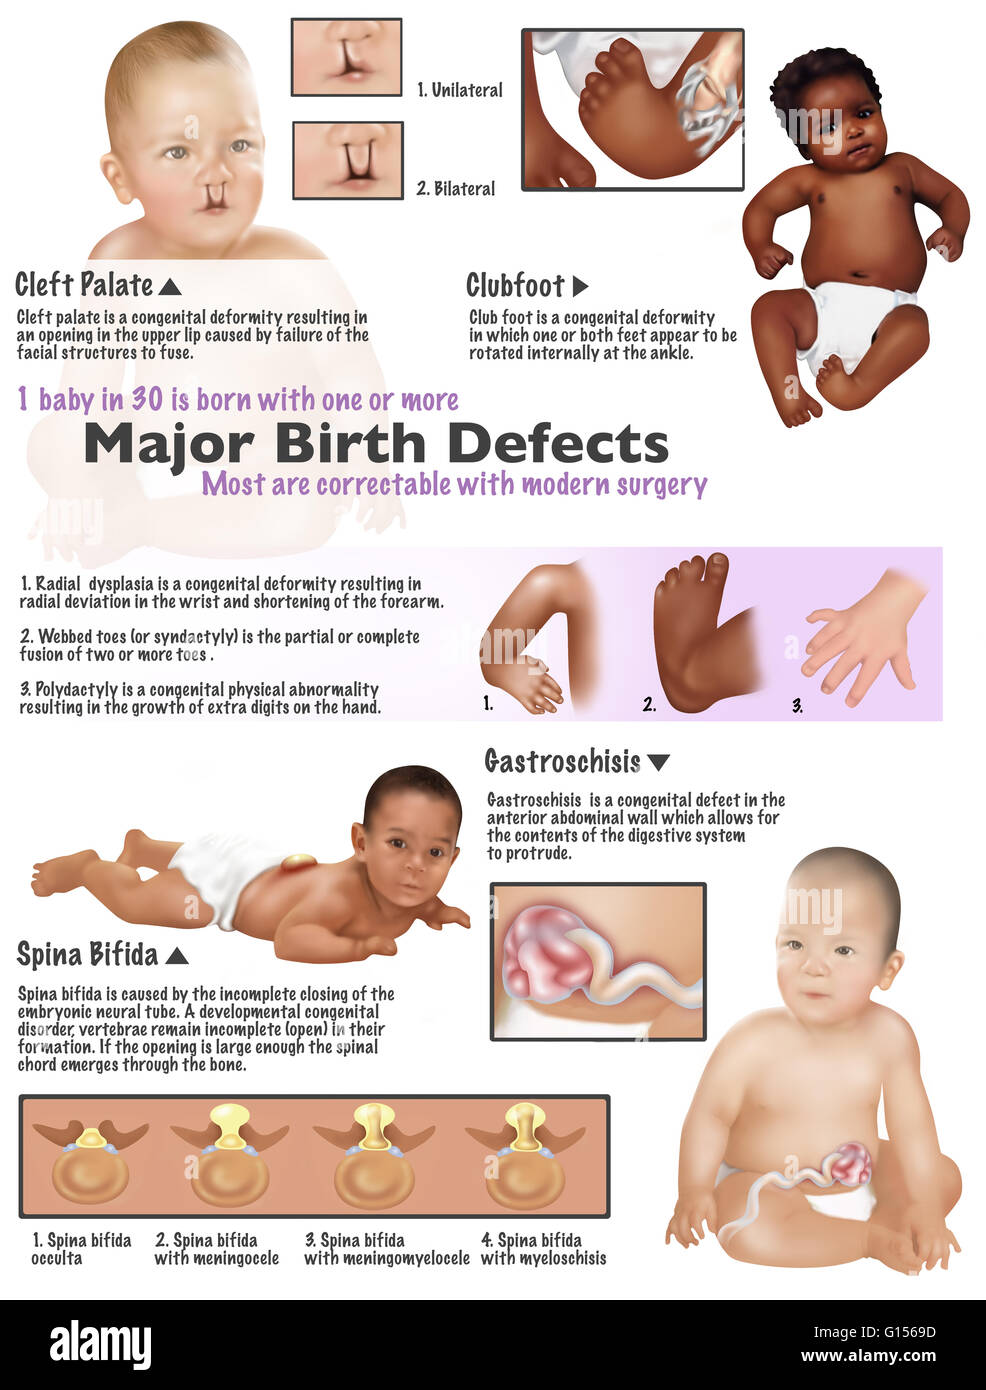 Illustration of birth defects found in babies. Cleft palate, clubfoot, radial dysplasia, webbed toes, polydactyl, gastroschisis, and spina bifida. 1 baby in 30 is born with one or more major birth defects. Most are correctable with modern surgery. Stock Photo